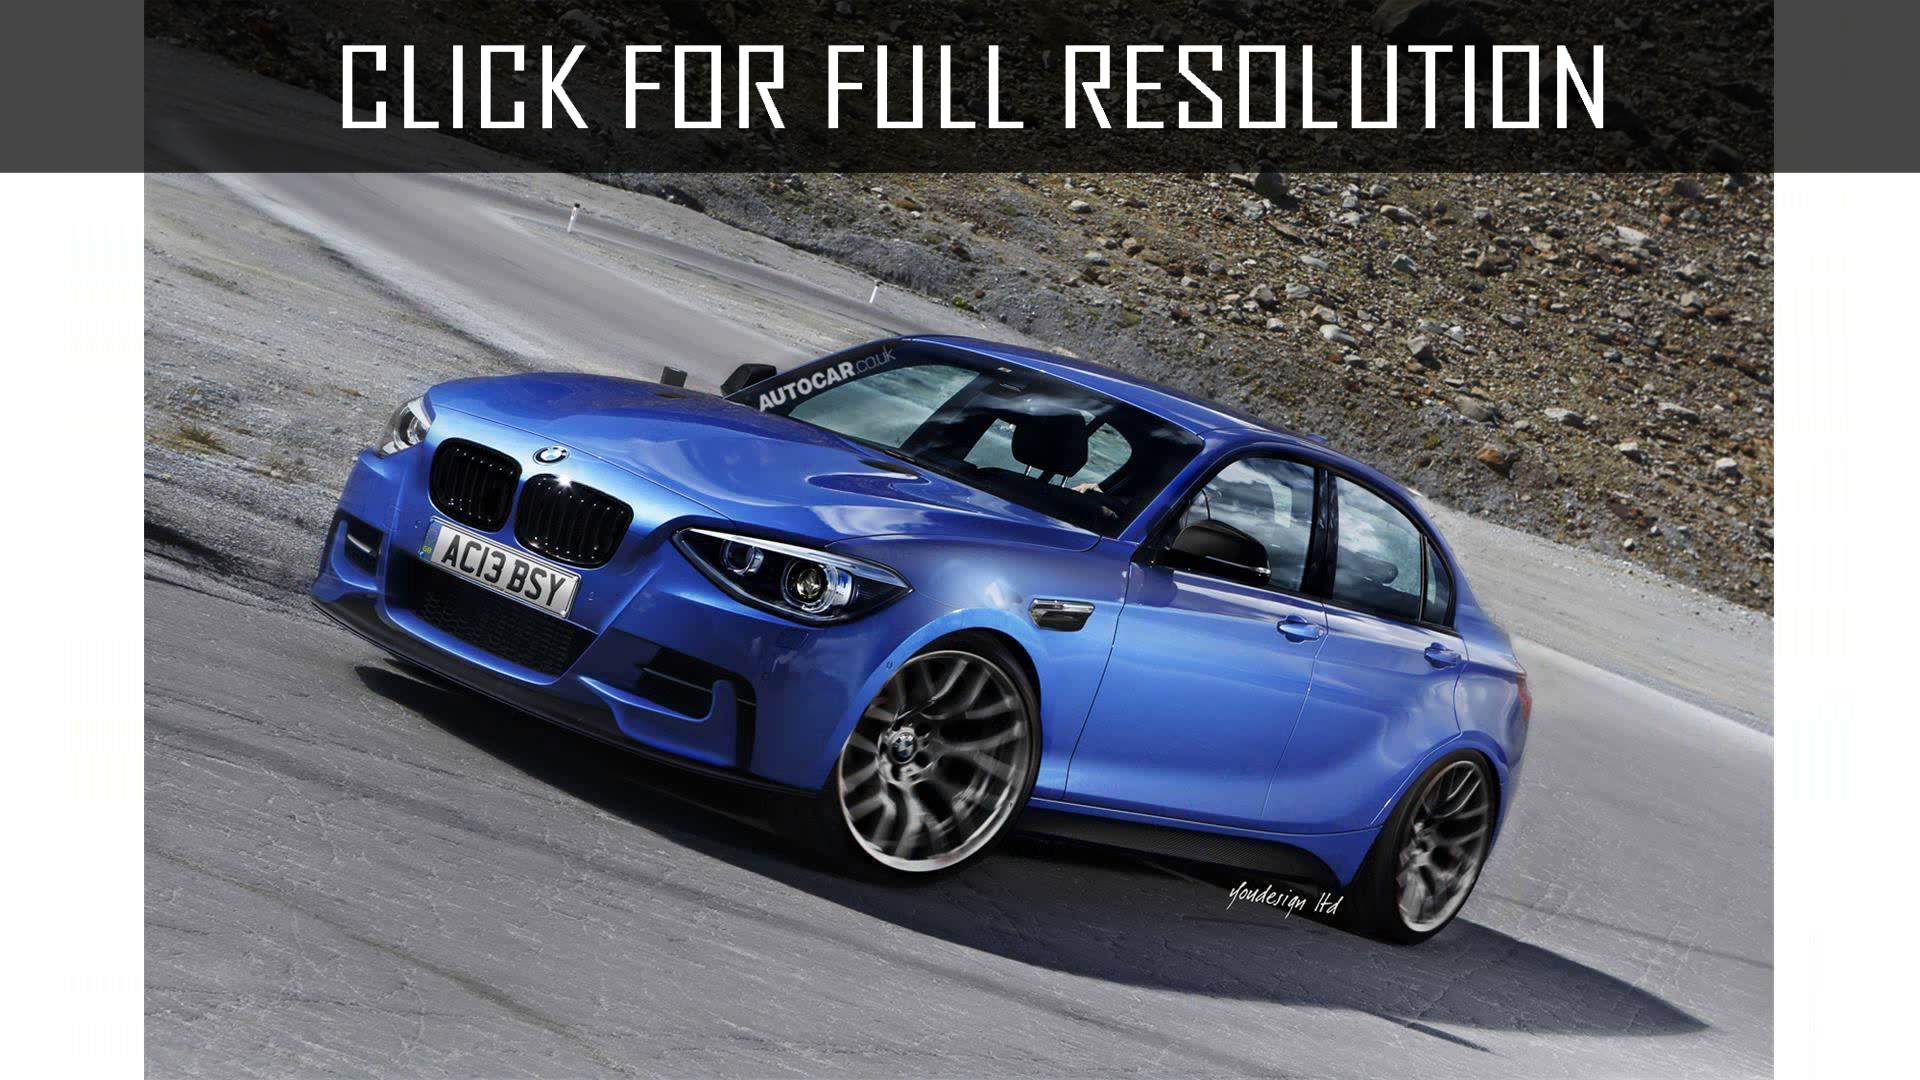 2015 Bmw 1 Series Coupe